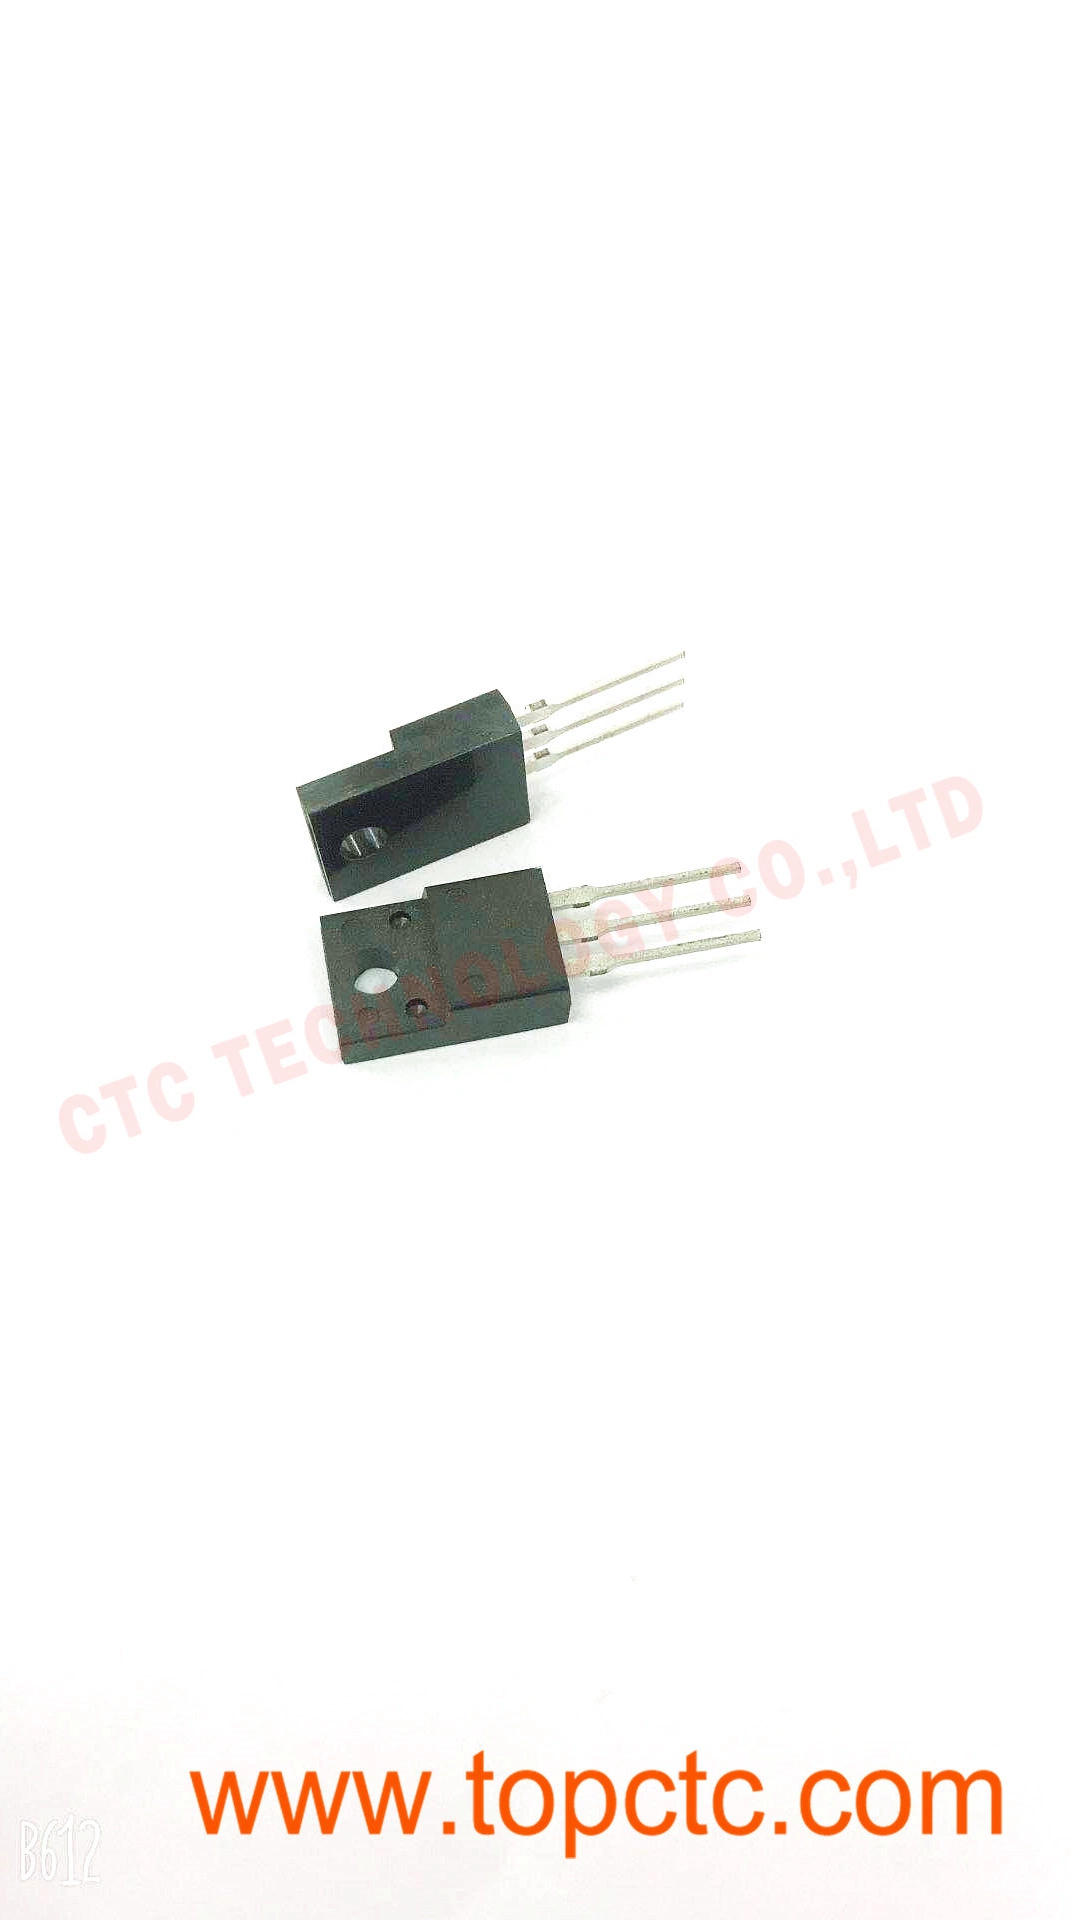 Enhancement Mode N and P-Channel Power NCE4688 MOSFET Integrated Circuit